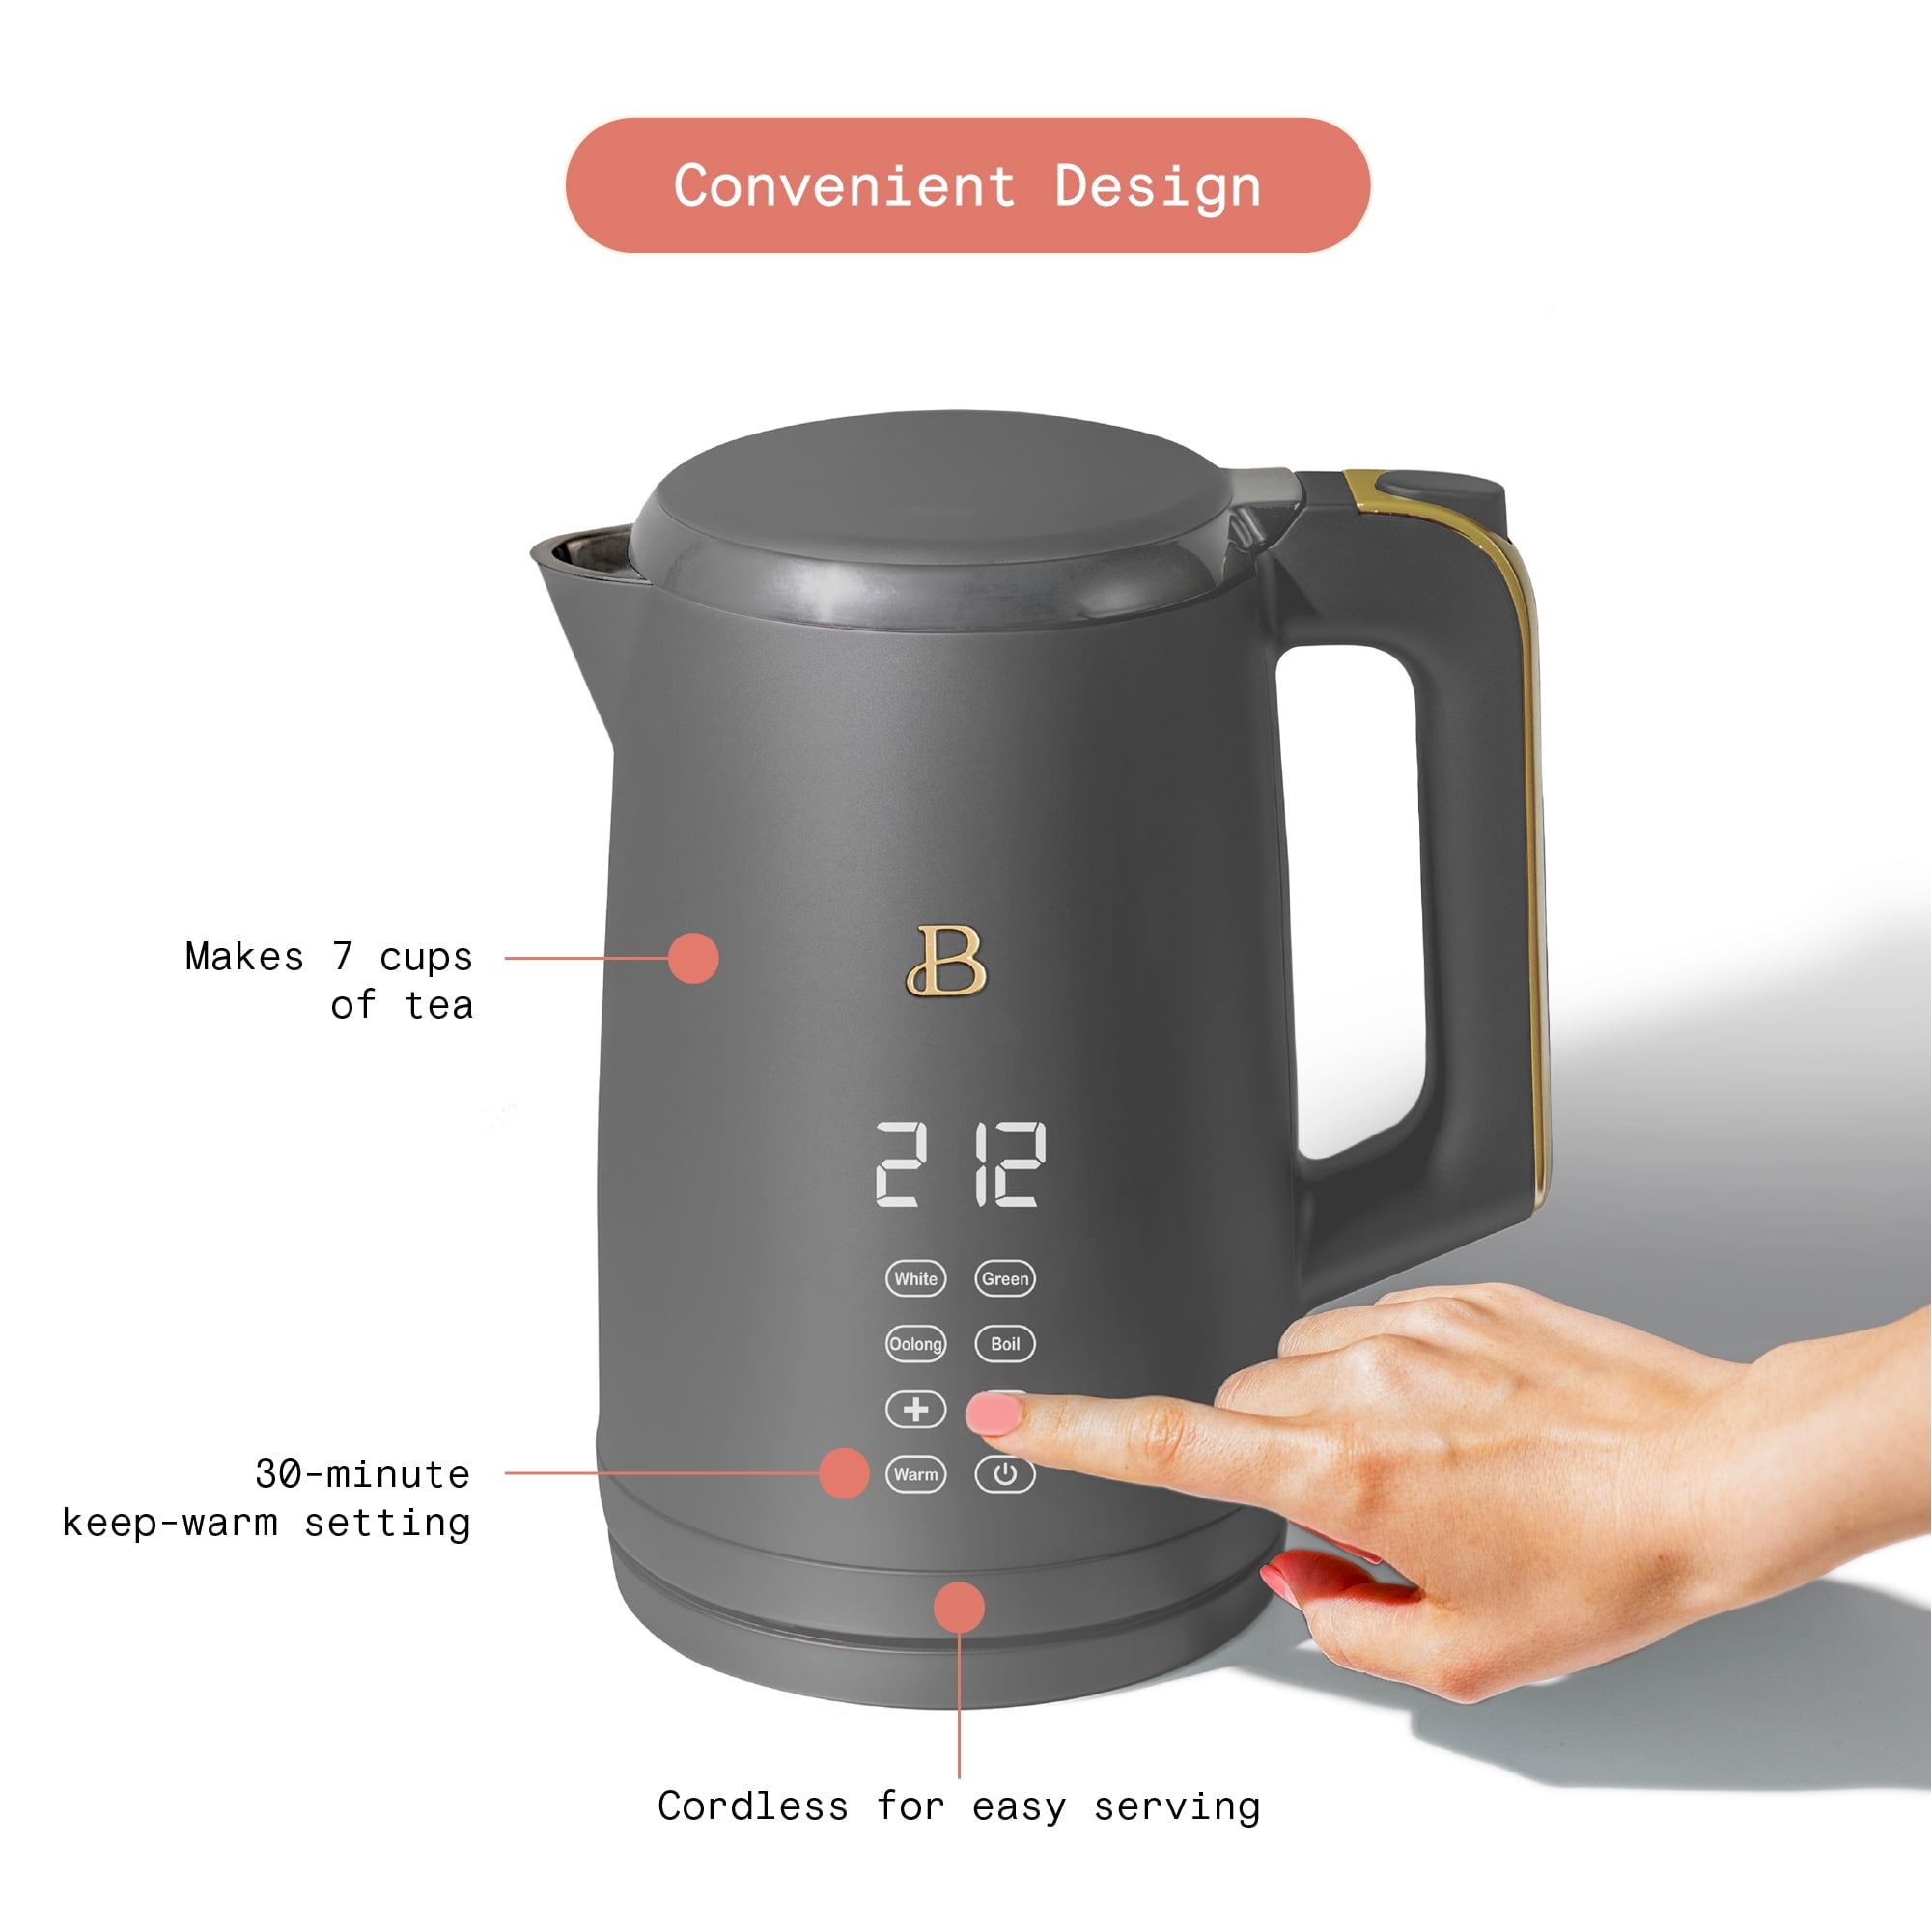 Beautiful 1.7-Liter Electric Kettle 1500 W with One-Touch Activation, Lavender by Drew Barrymore